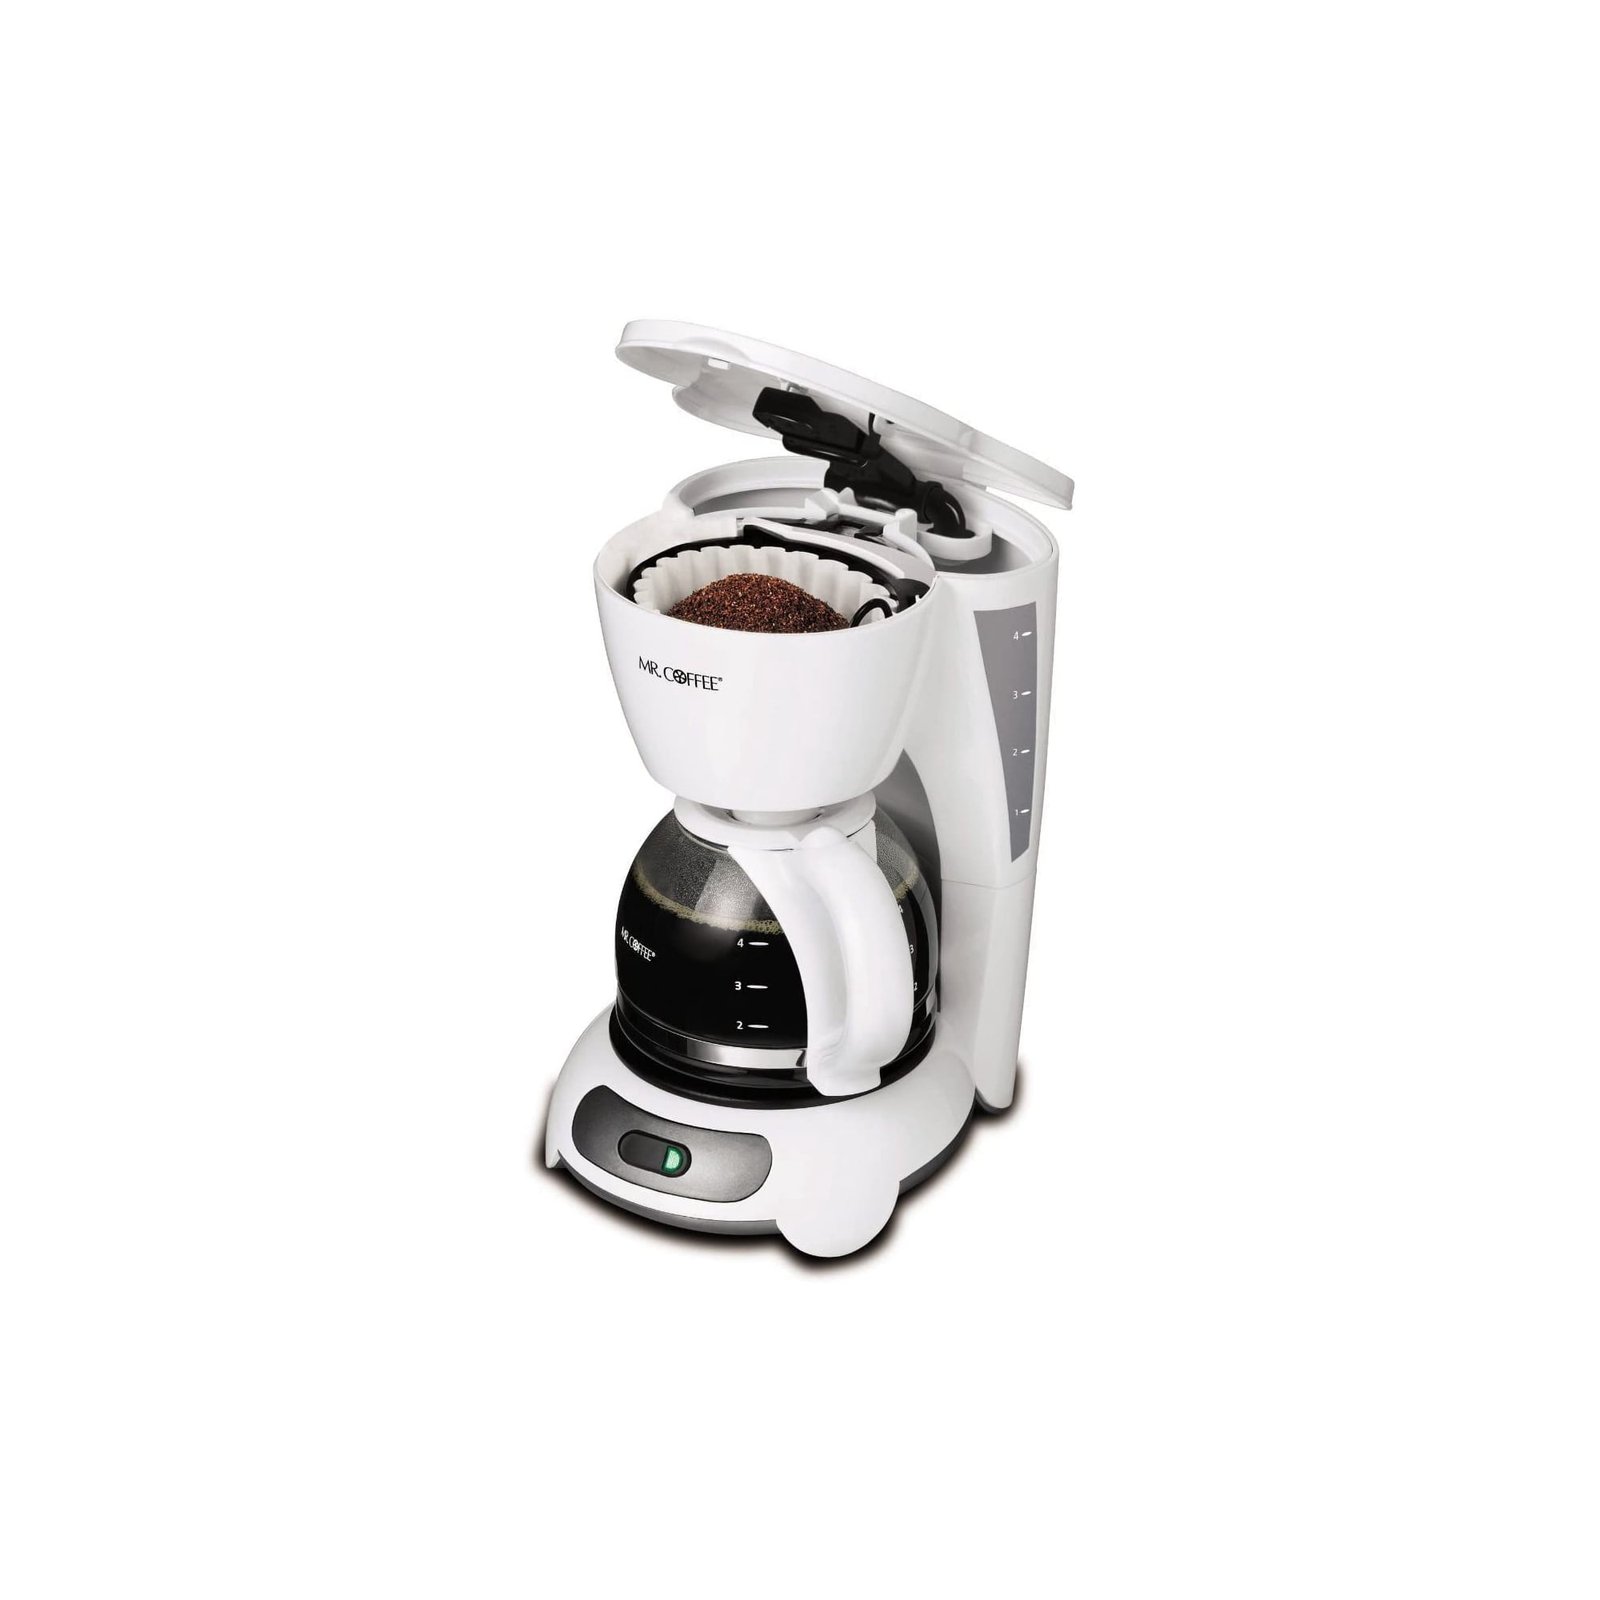 https://themarketdepot.com/wp-content/uploads/2023/01/Mr.-Coffee-4-Cup-Coffee-Maker-Automatic-Shut-Off-Pause-n-Serve-Feature-White-1.jpeg